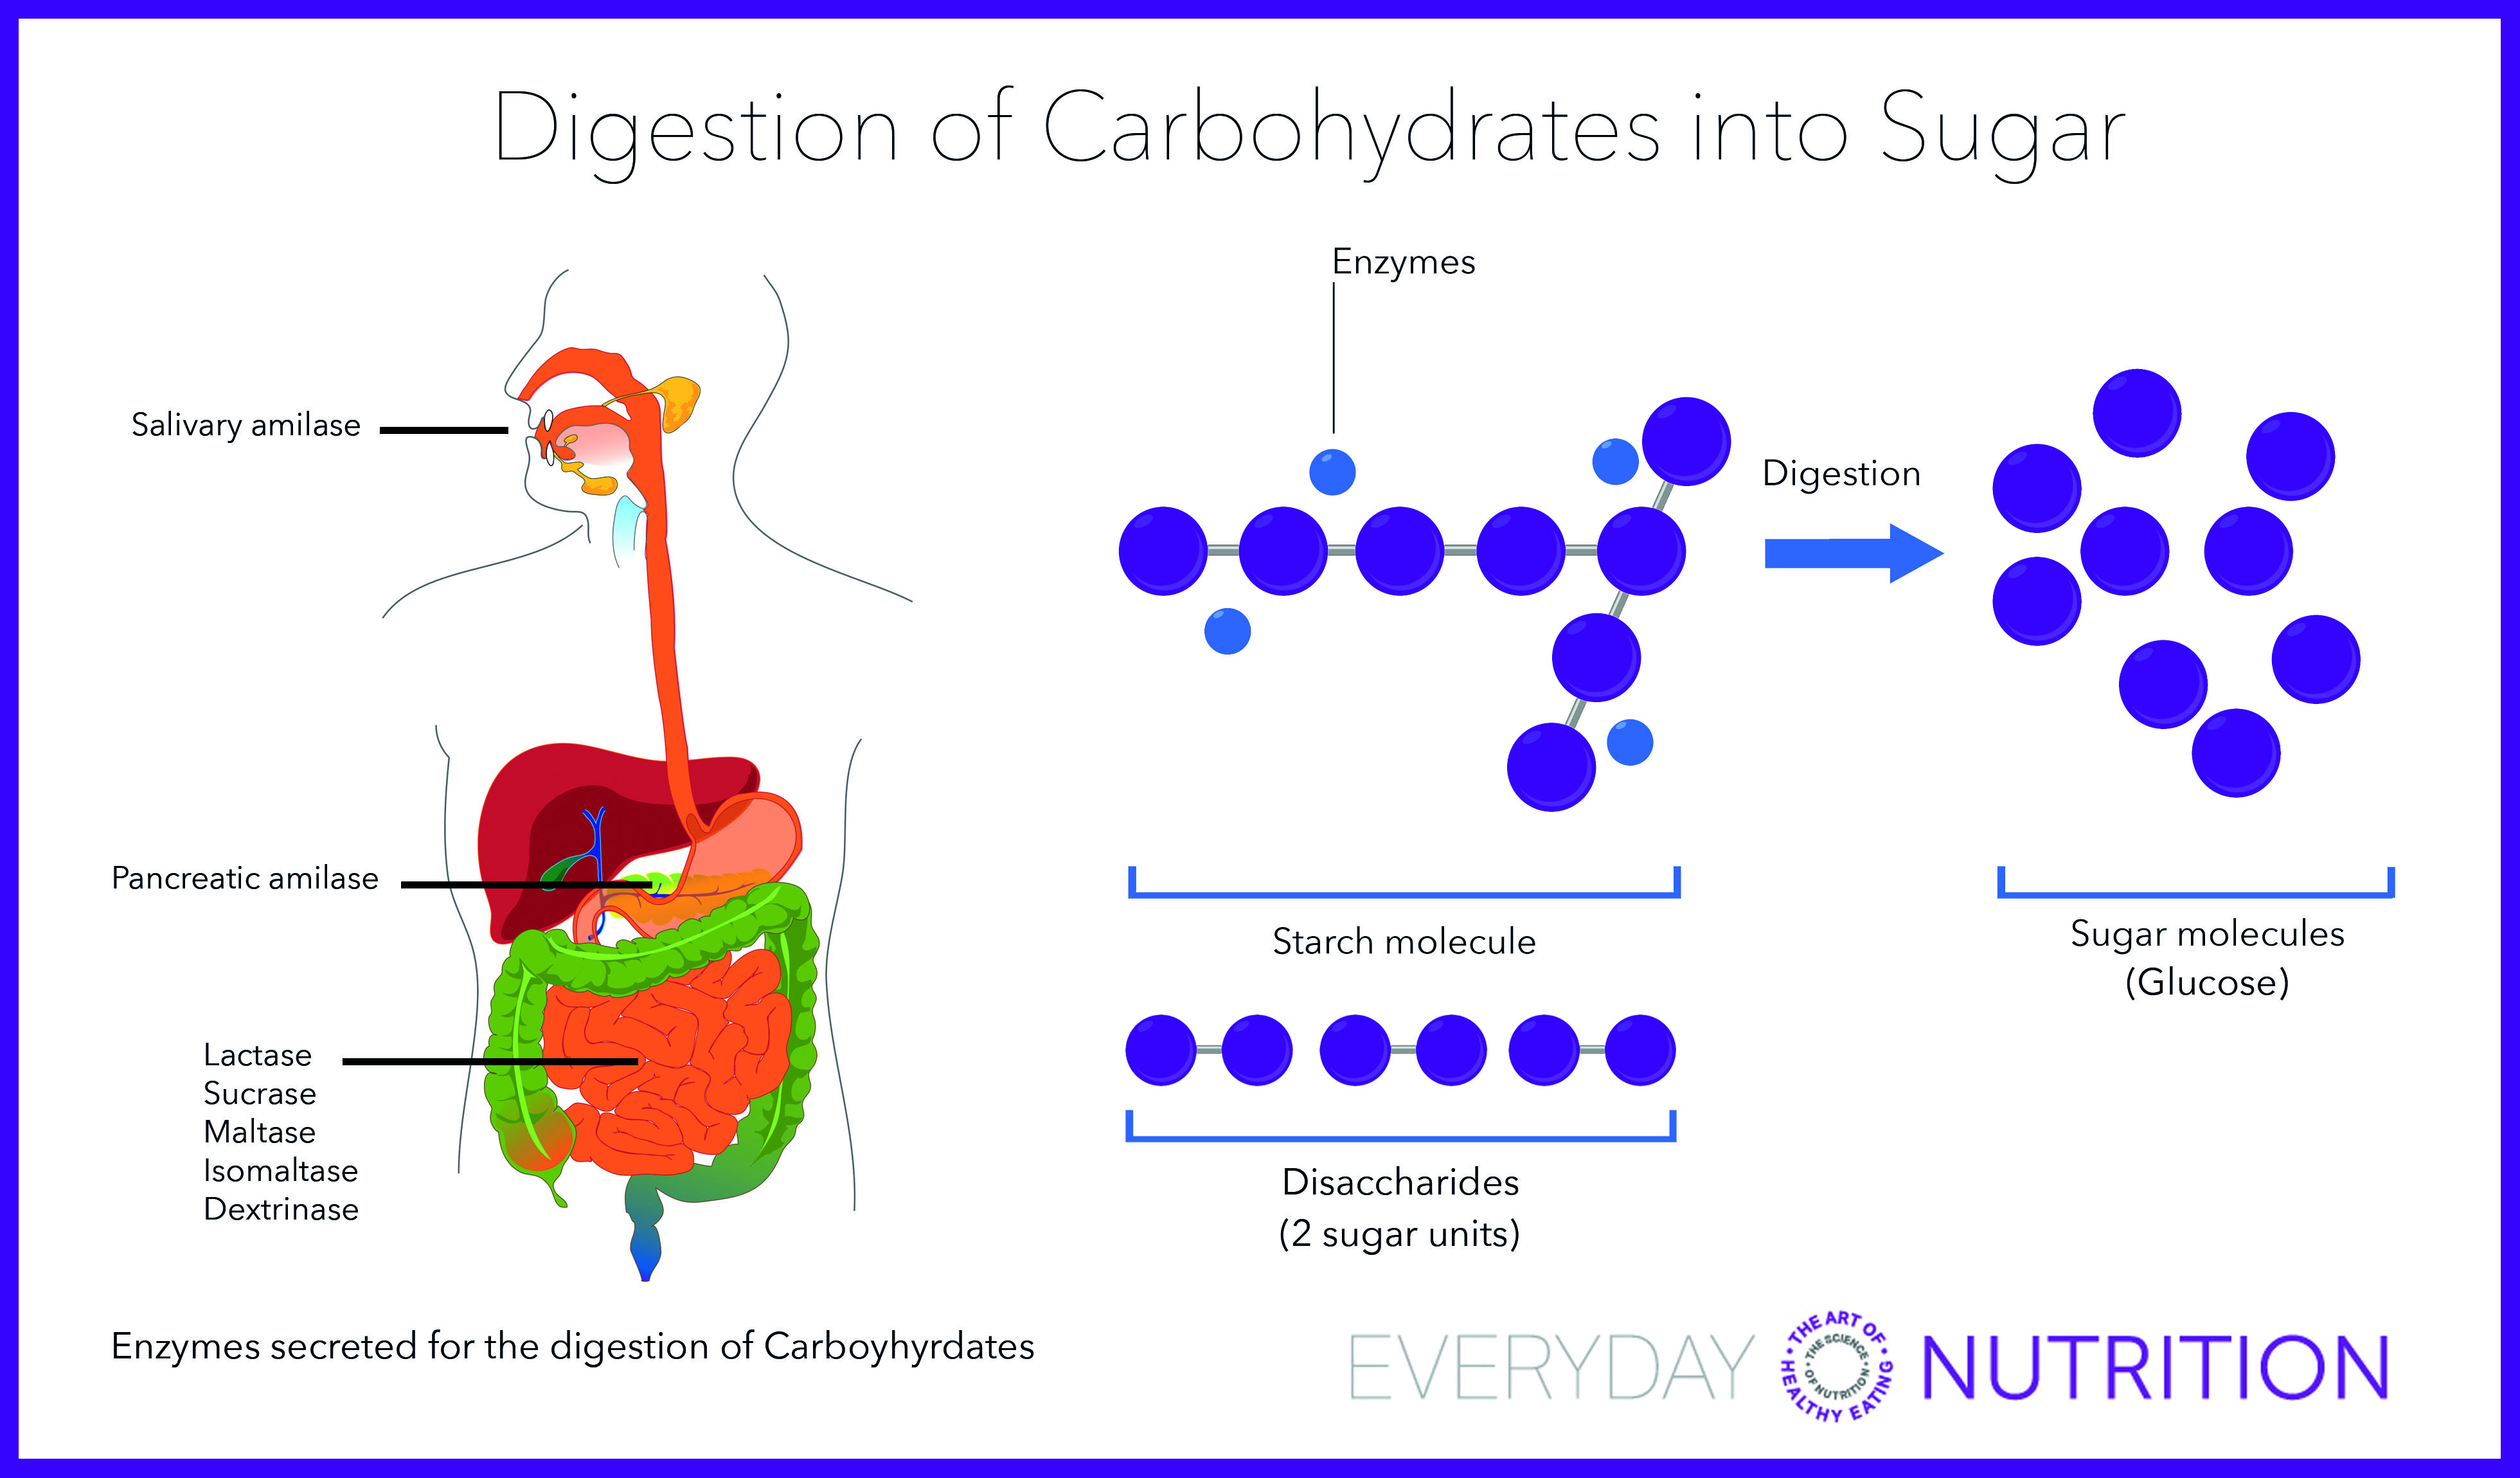 Everyday Nutrition Digestion Of Carbohydrates Into Sugar